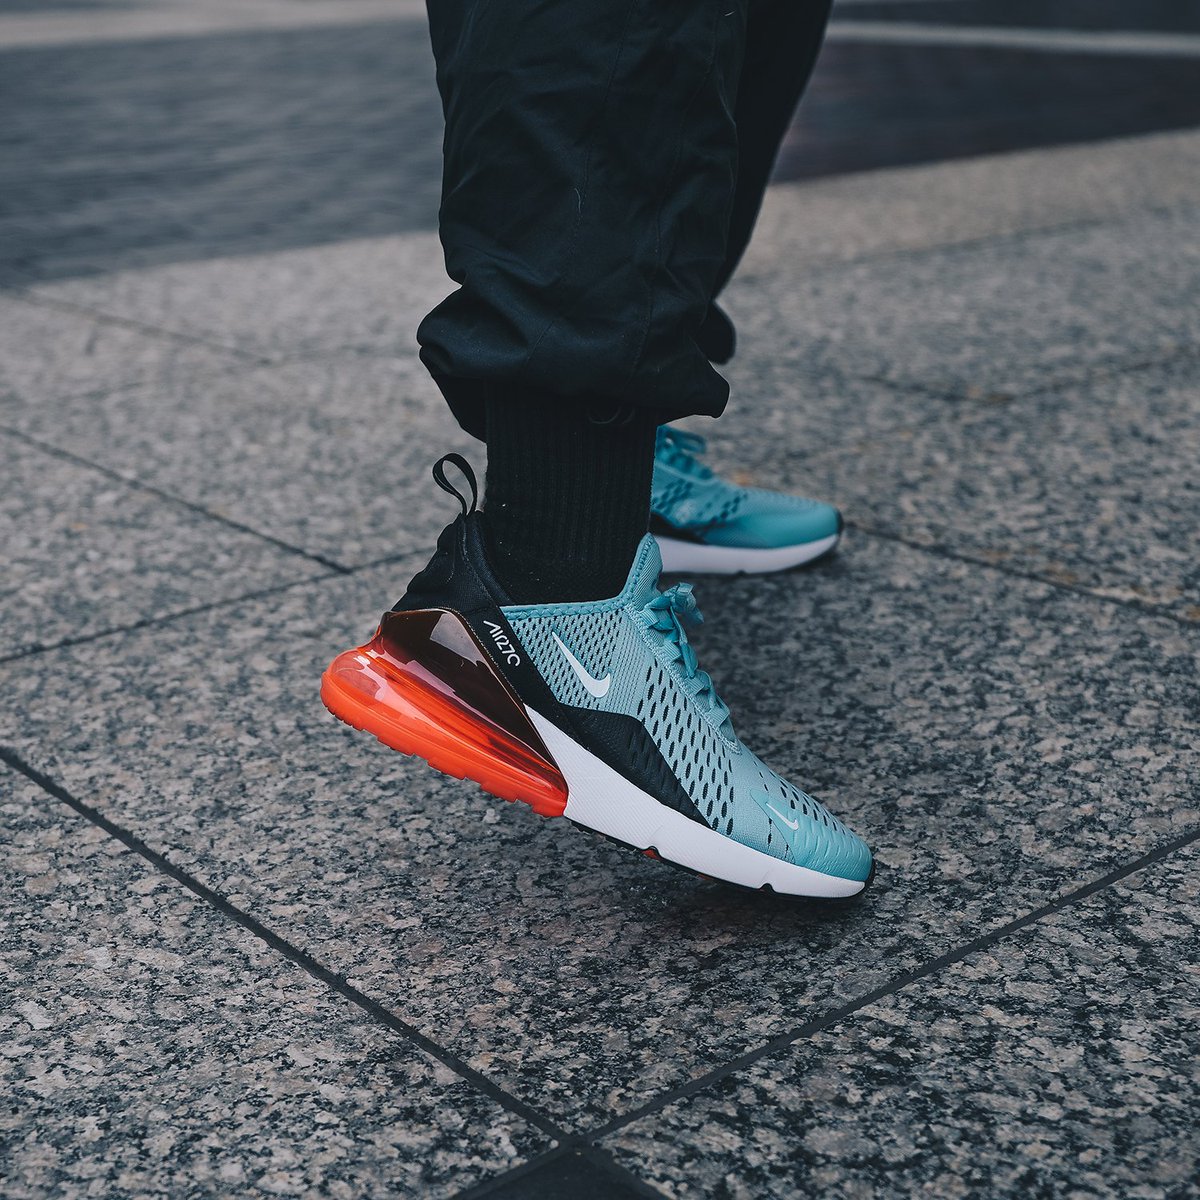 DTLR på Twitter: "The Women's 'Ocean Bliss' Air Max 270 is now available to  cop at VILLA! Link to shop: https://t.co/JiI7Dx2RwF  https://t.co/wovCJLmSpH" / Twitter